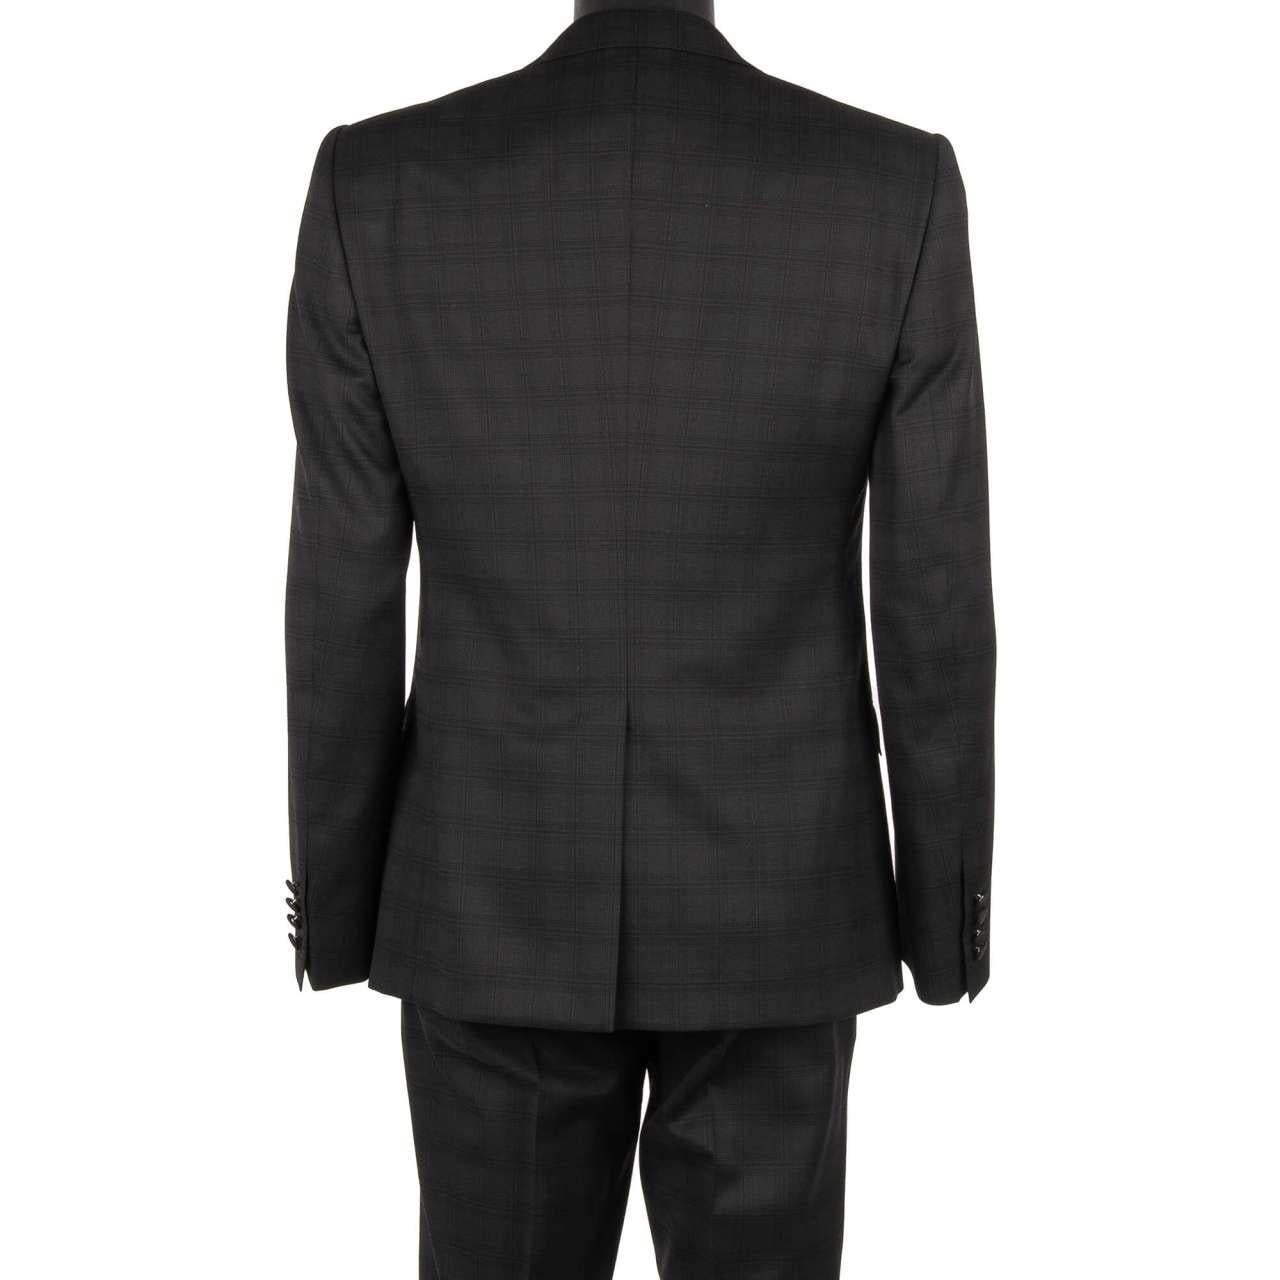 D&G 3 Piece Checked Suit Jacket Waistcoat Bee Brooch SICILIA Black 56 For Sale 2